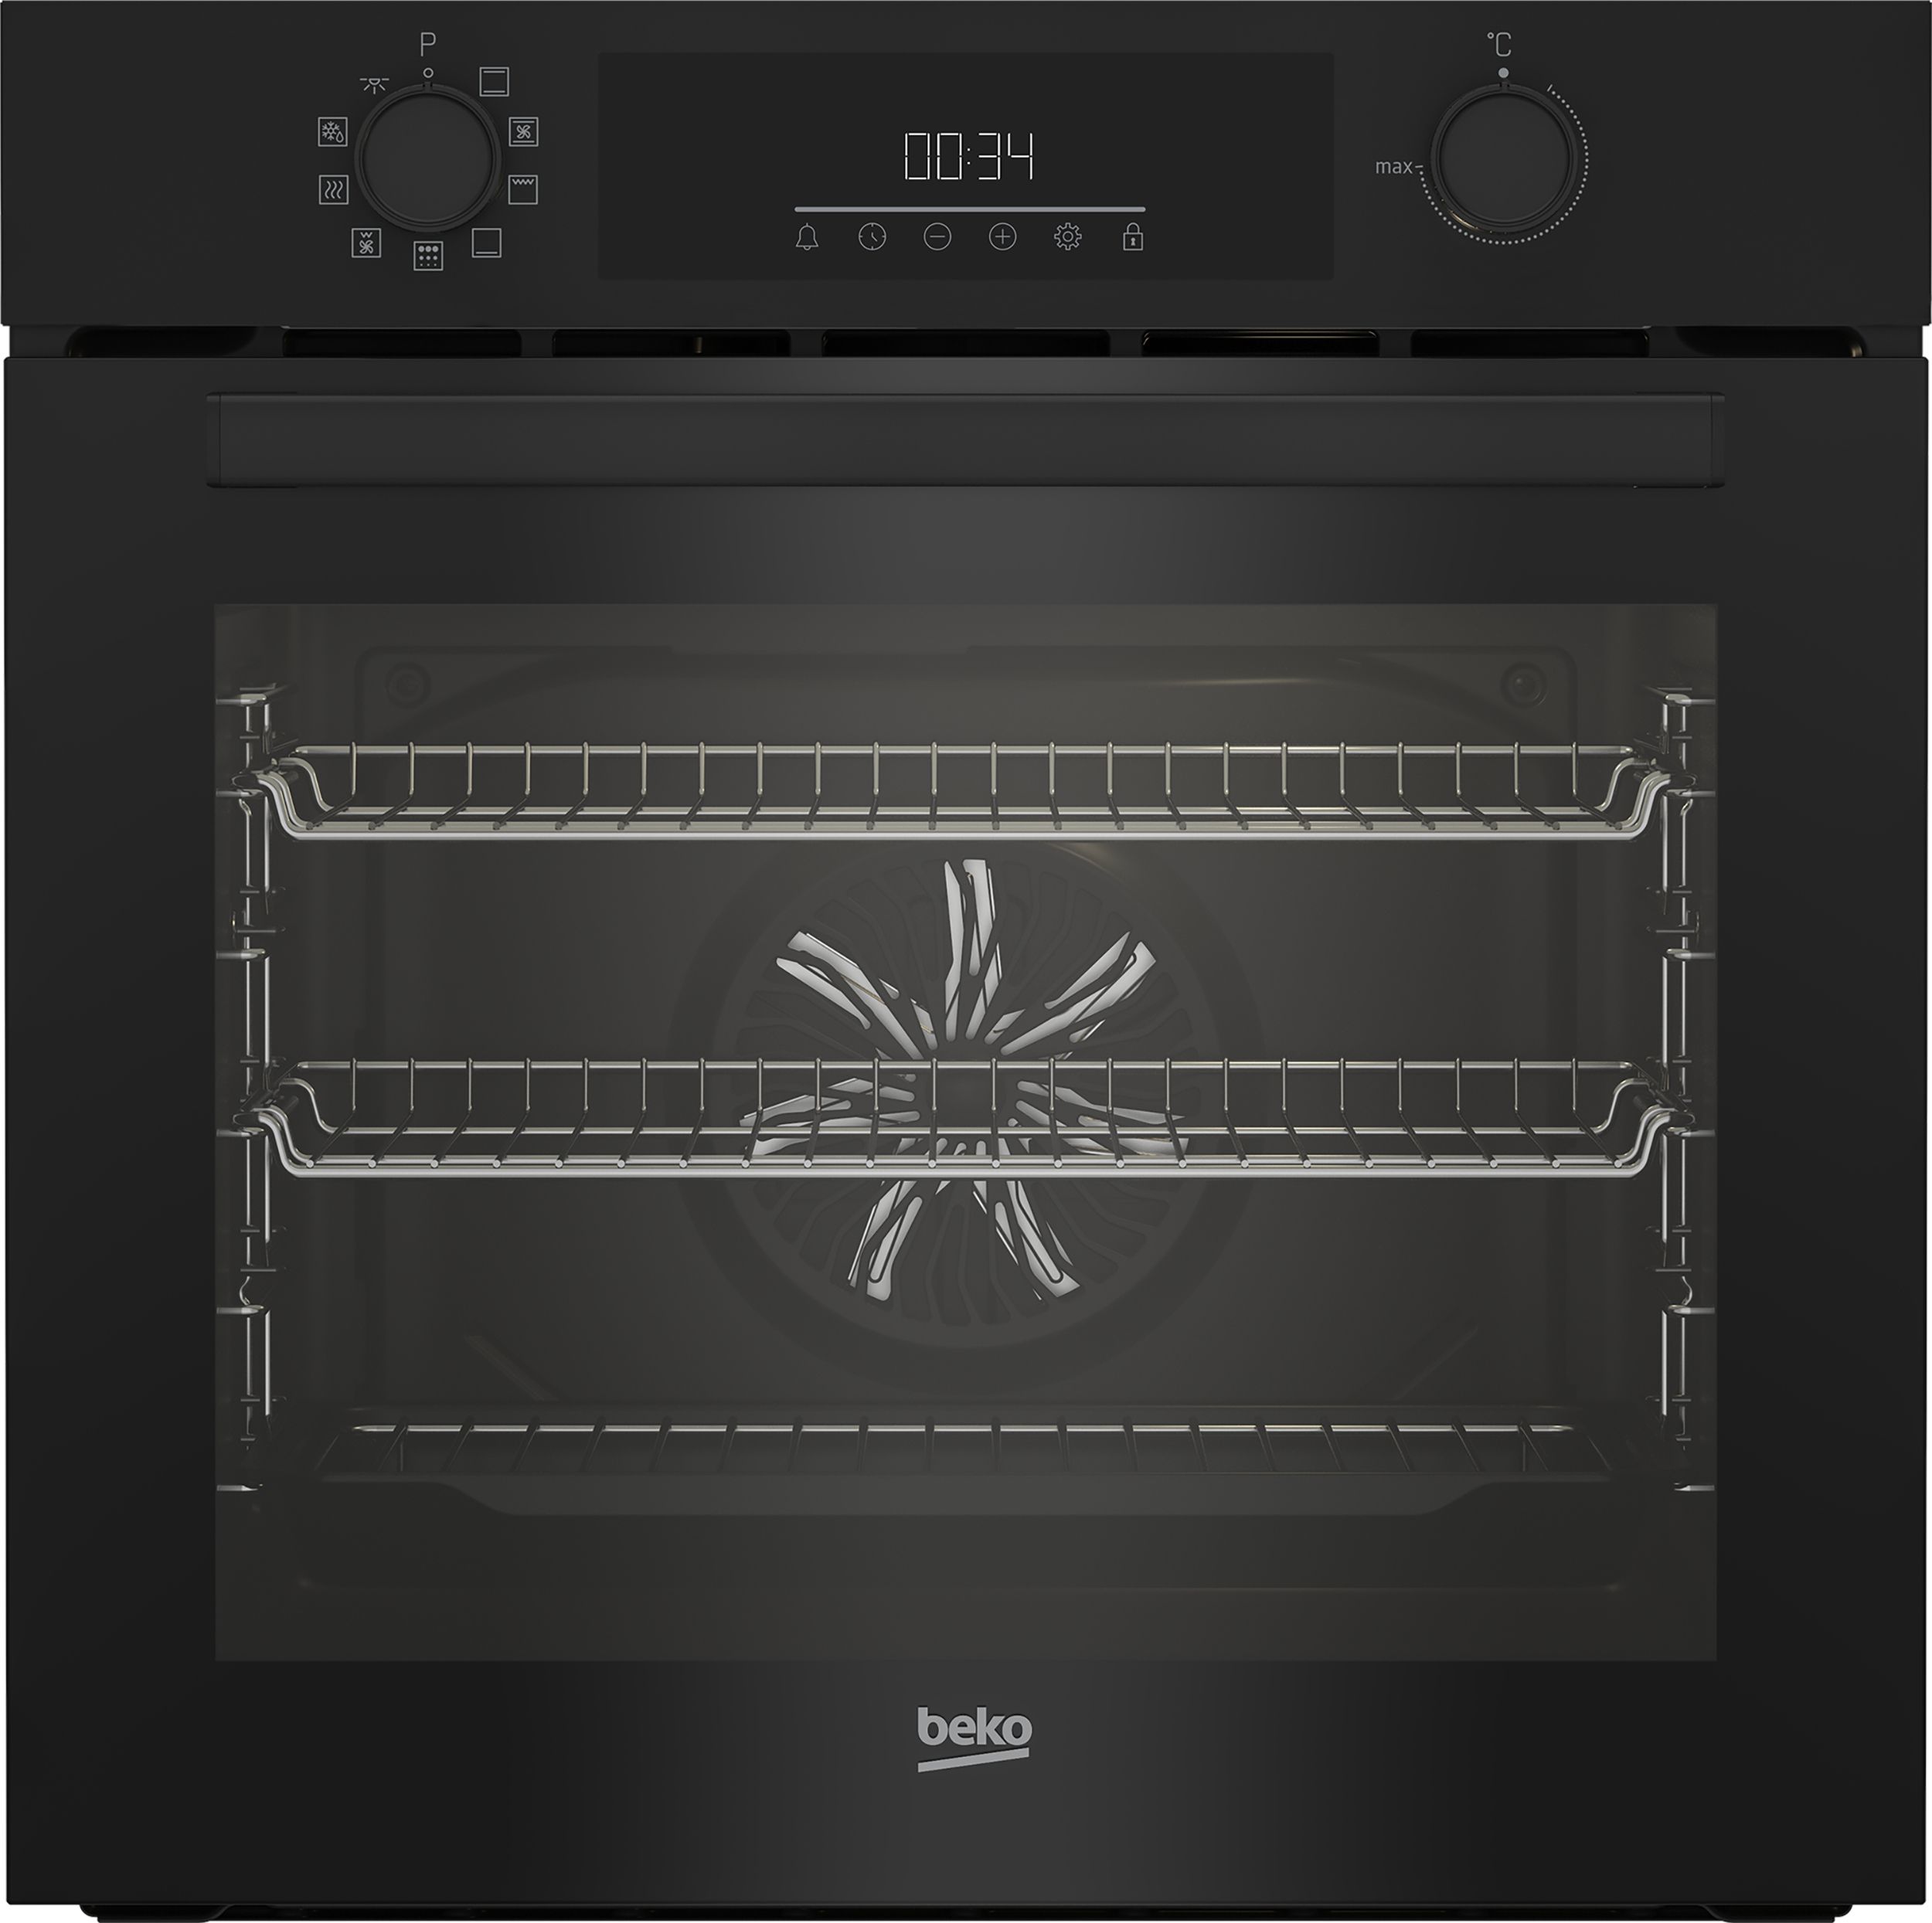 Beko BBIE12301BMP Built In Electric Single Oven - Black - A Rated, Black